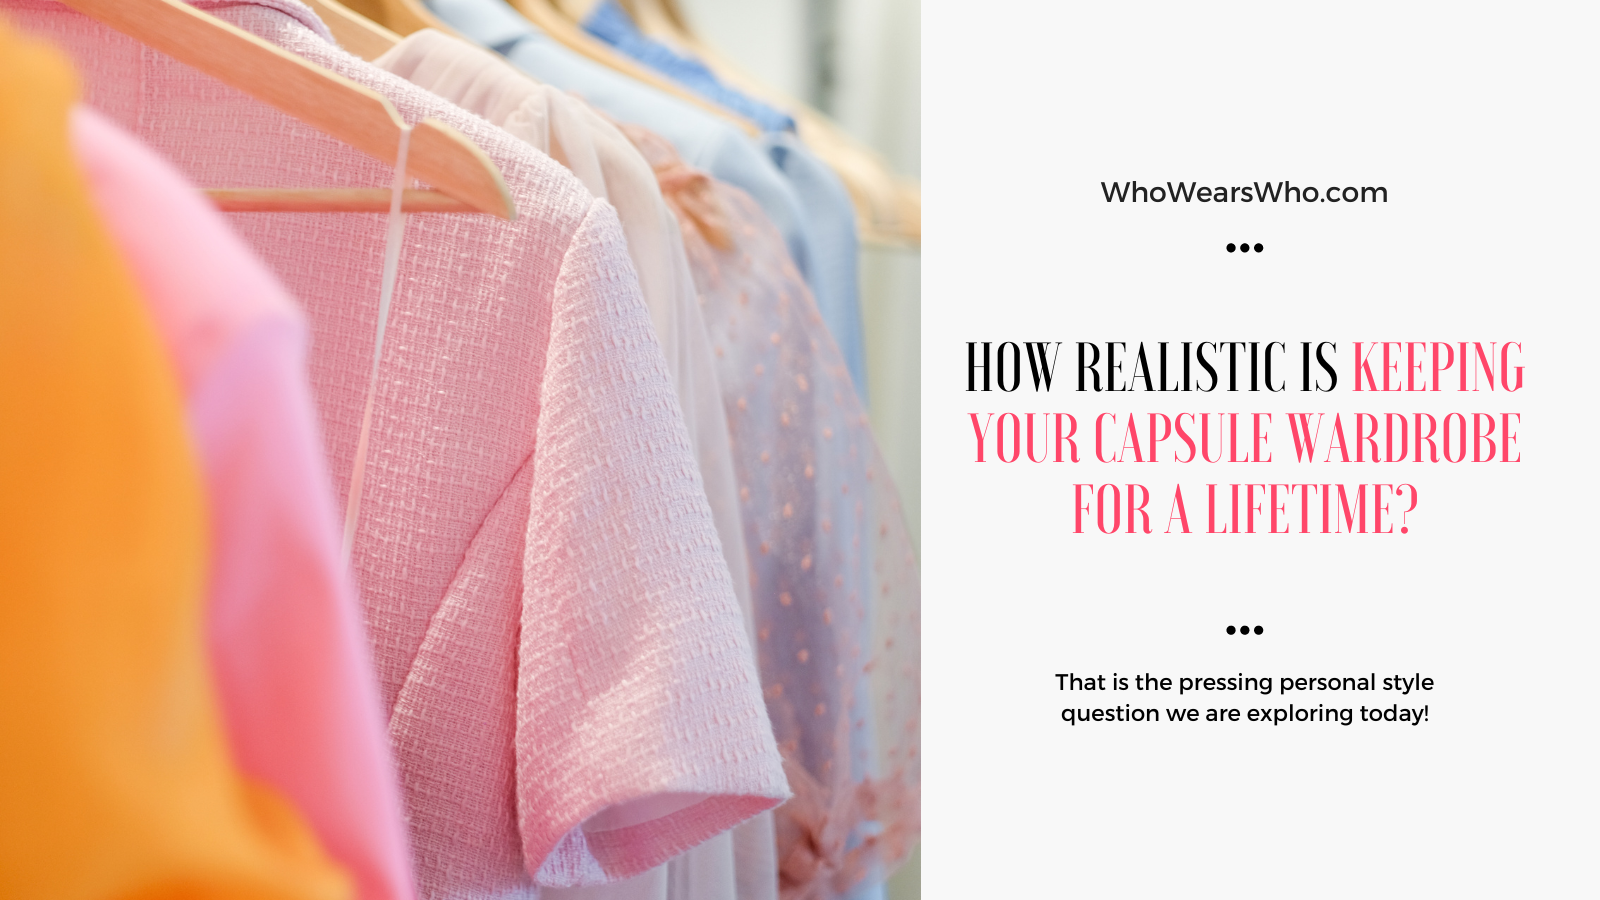 How realistic is keeping your capsule wardrobe for a lifetime Twitter